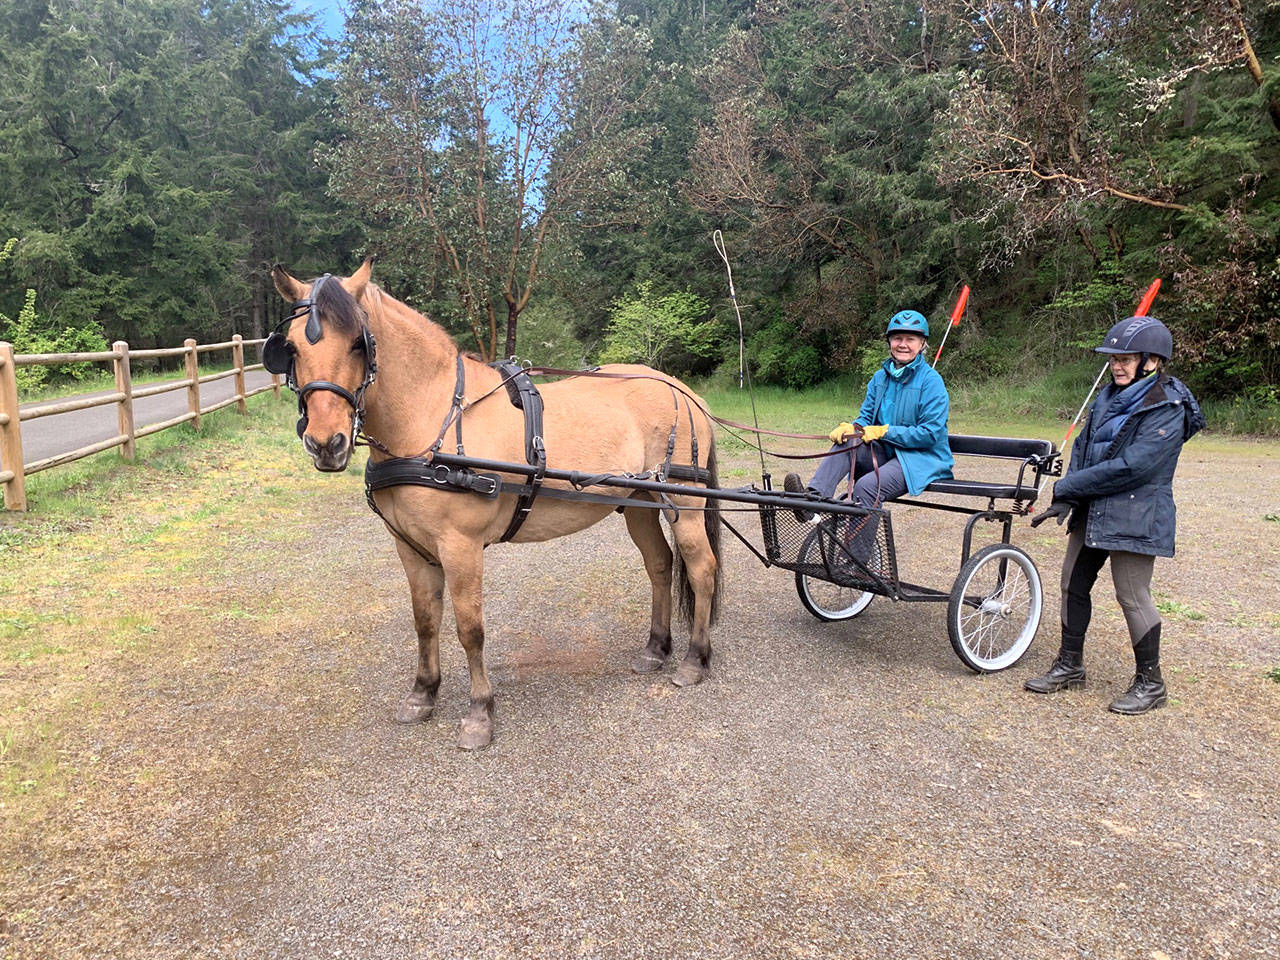 In Port Townsend Sarah “Sally” Dean, seated, helps prepare Juelie Dalzell and her horse Jack to pull the cart Dalzell and her husband Jeff Chapman took this month for a 18-day, 240-mile journey on The Palouse to Cascades trail. (Photo courtesy of Andrea Gold)